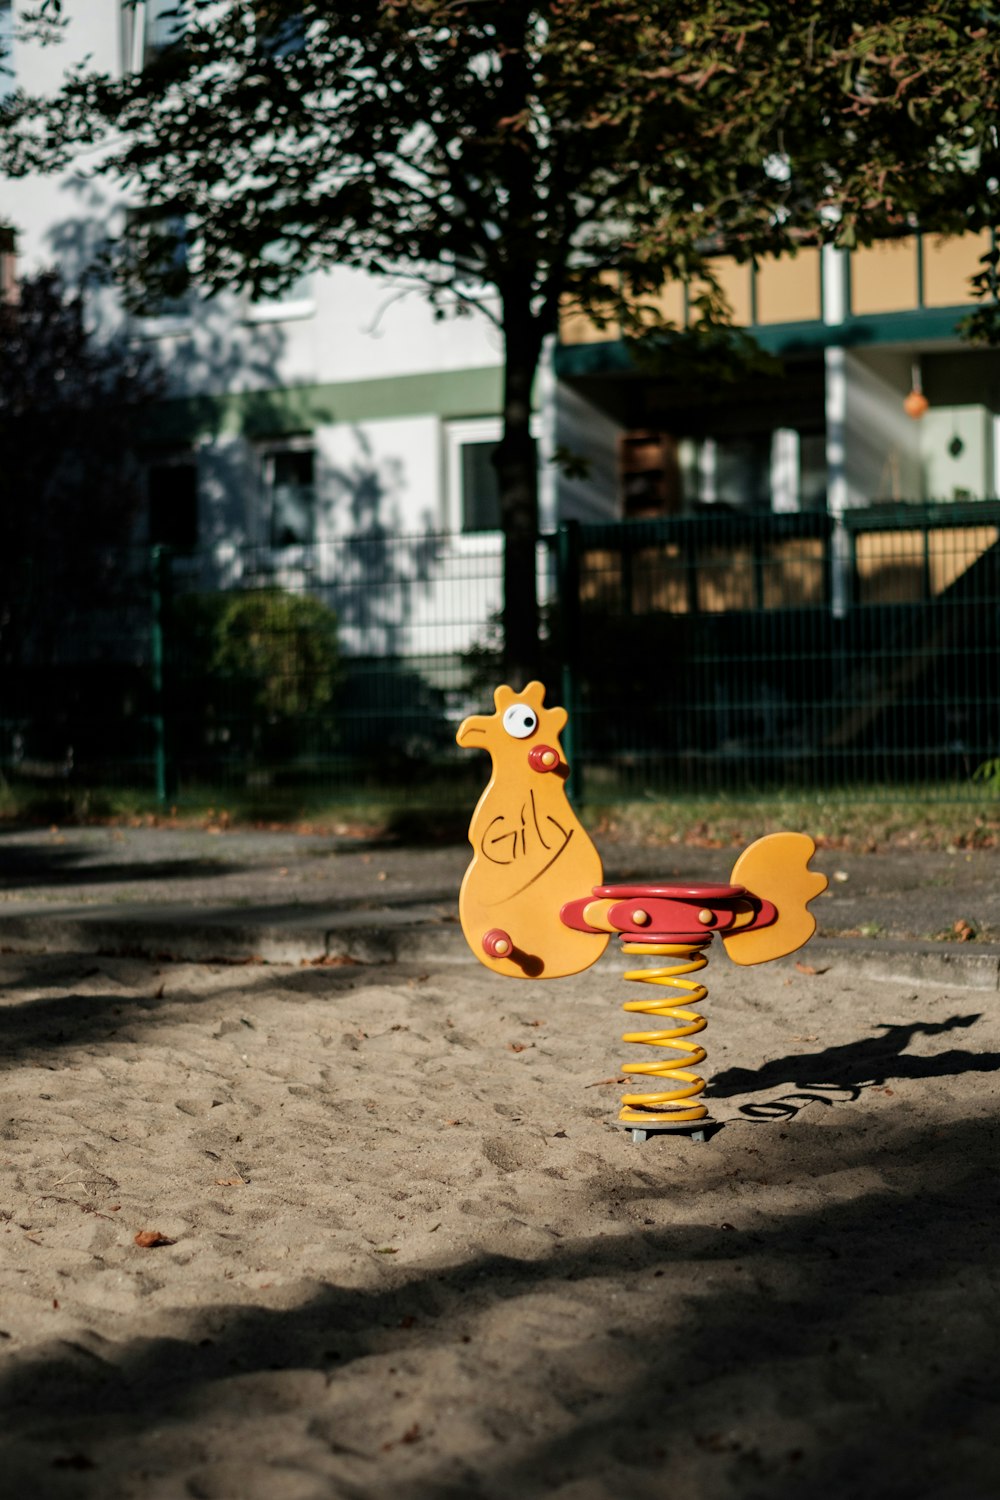 yellow and red metal chicken toy with coil spring